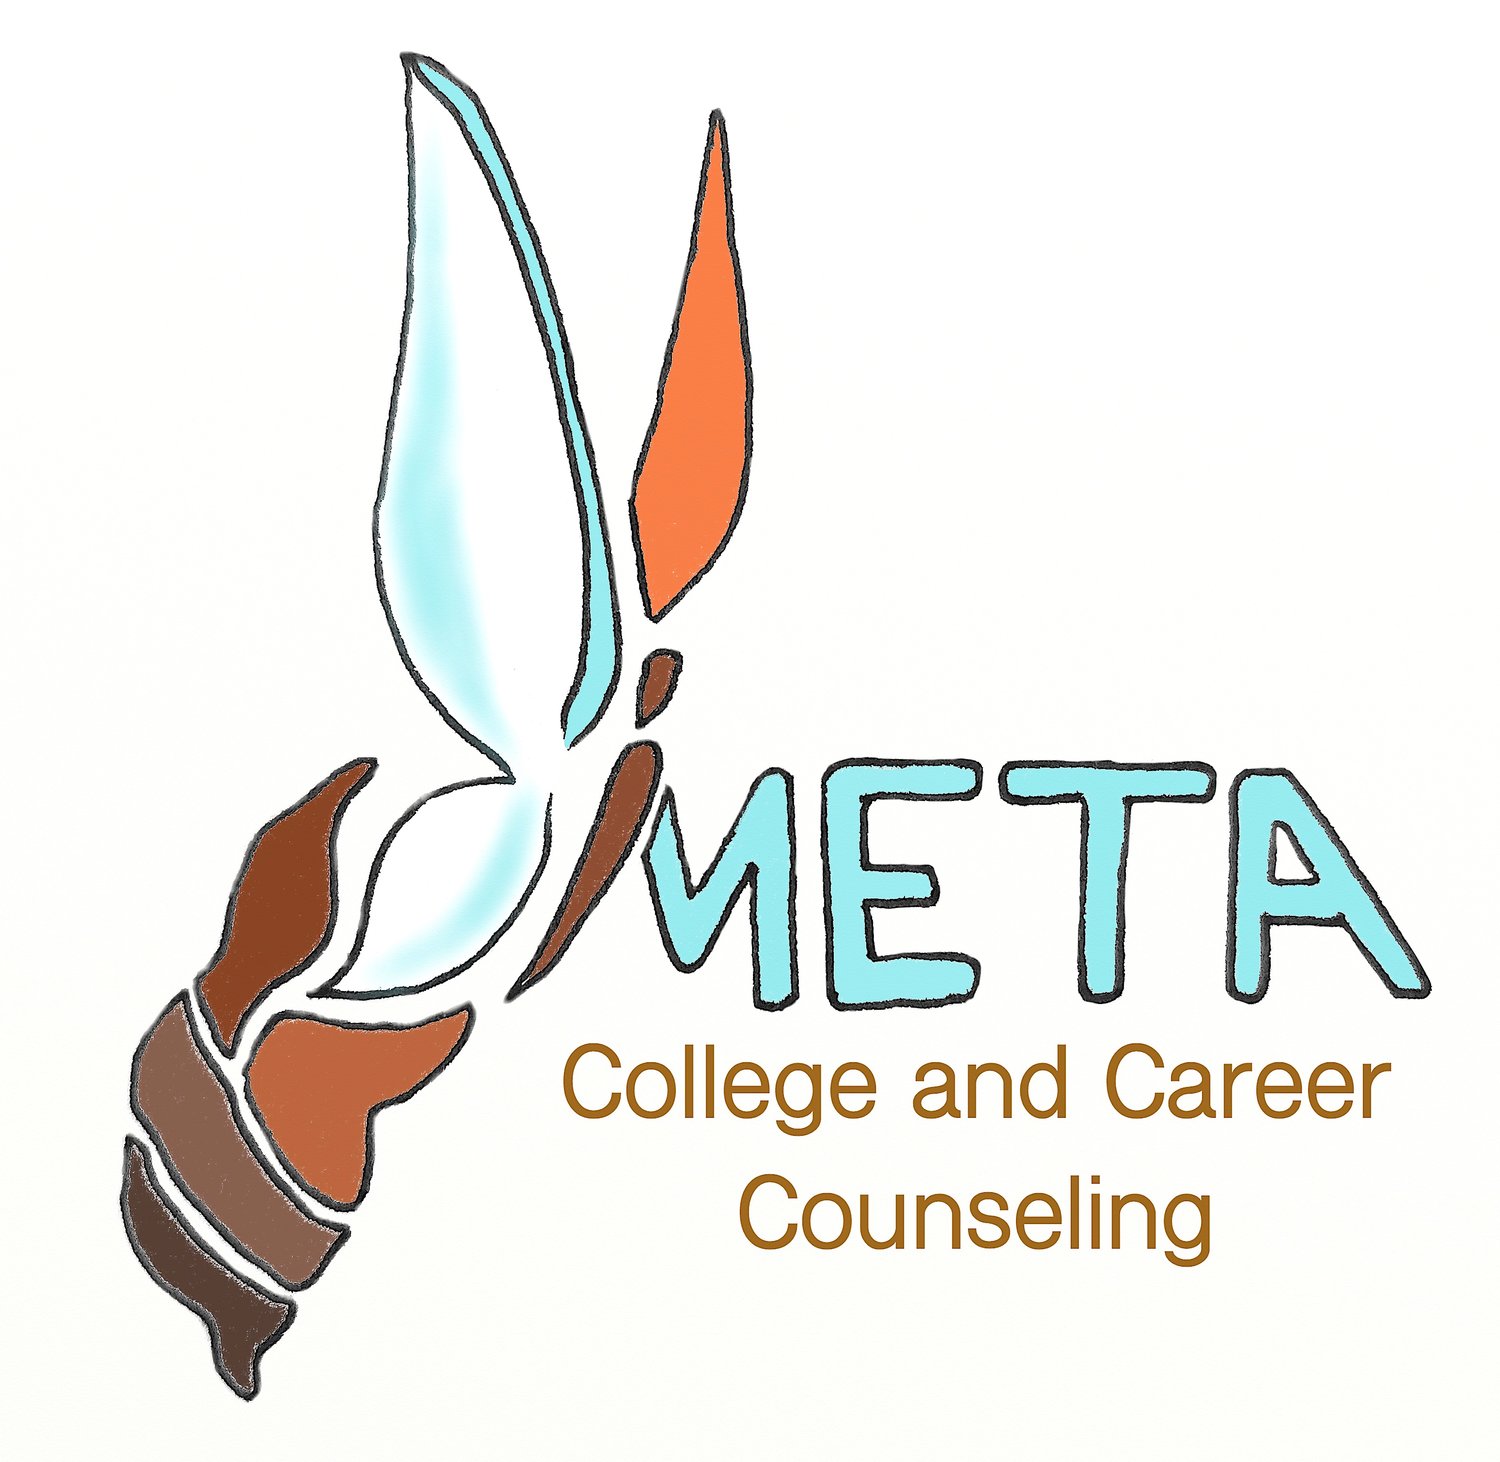 Meta College and Career Counseling